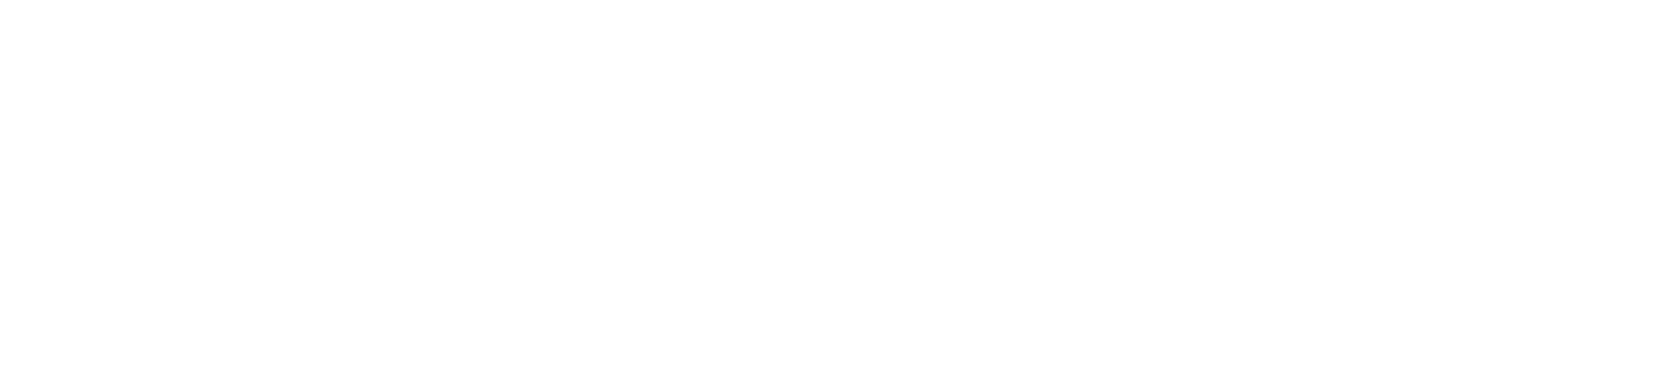 Sutherland's Bicycle Shop Aids